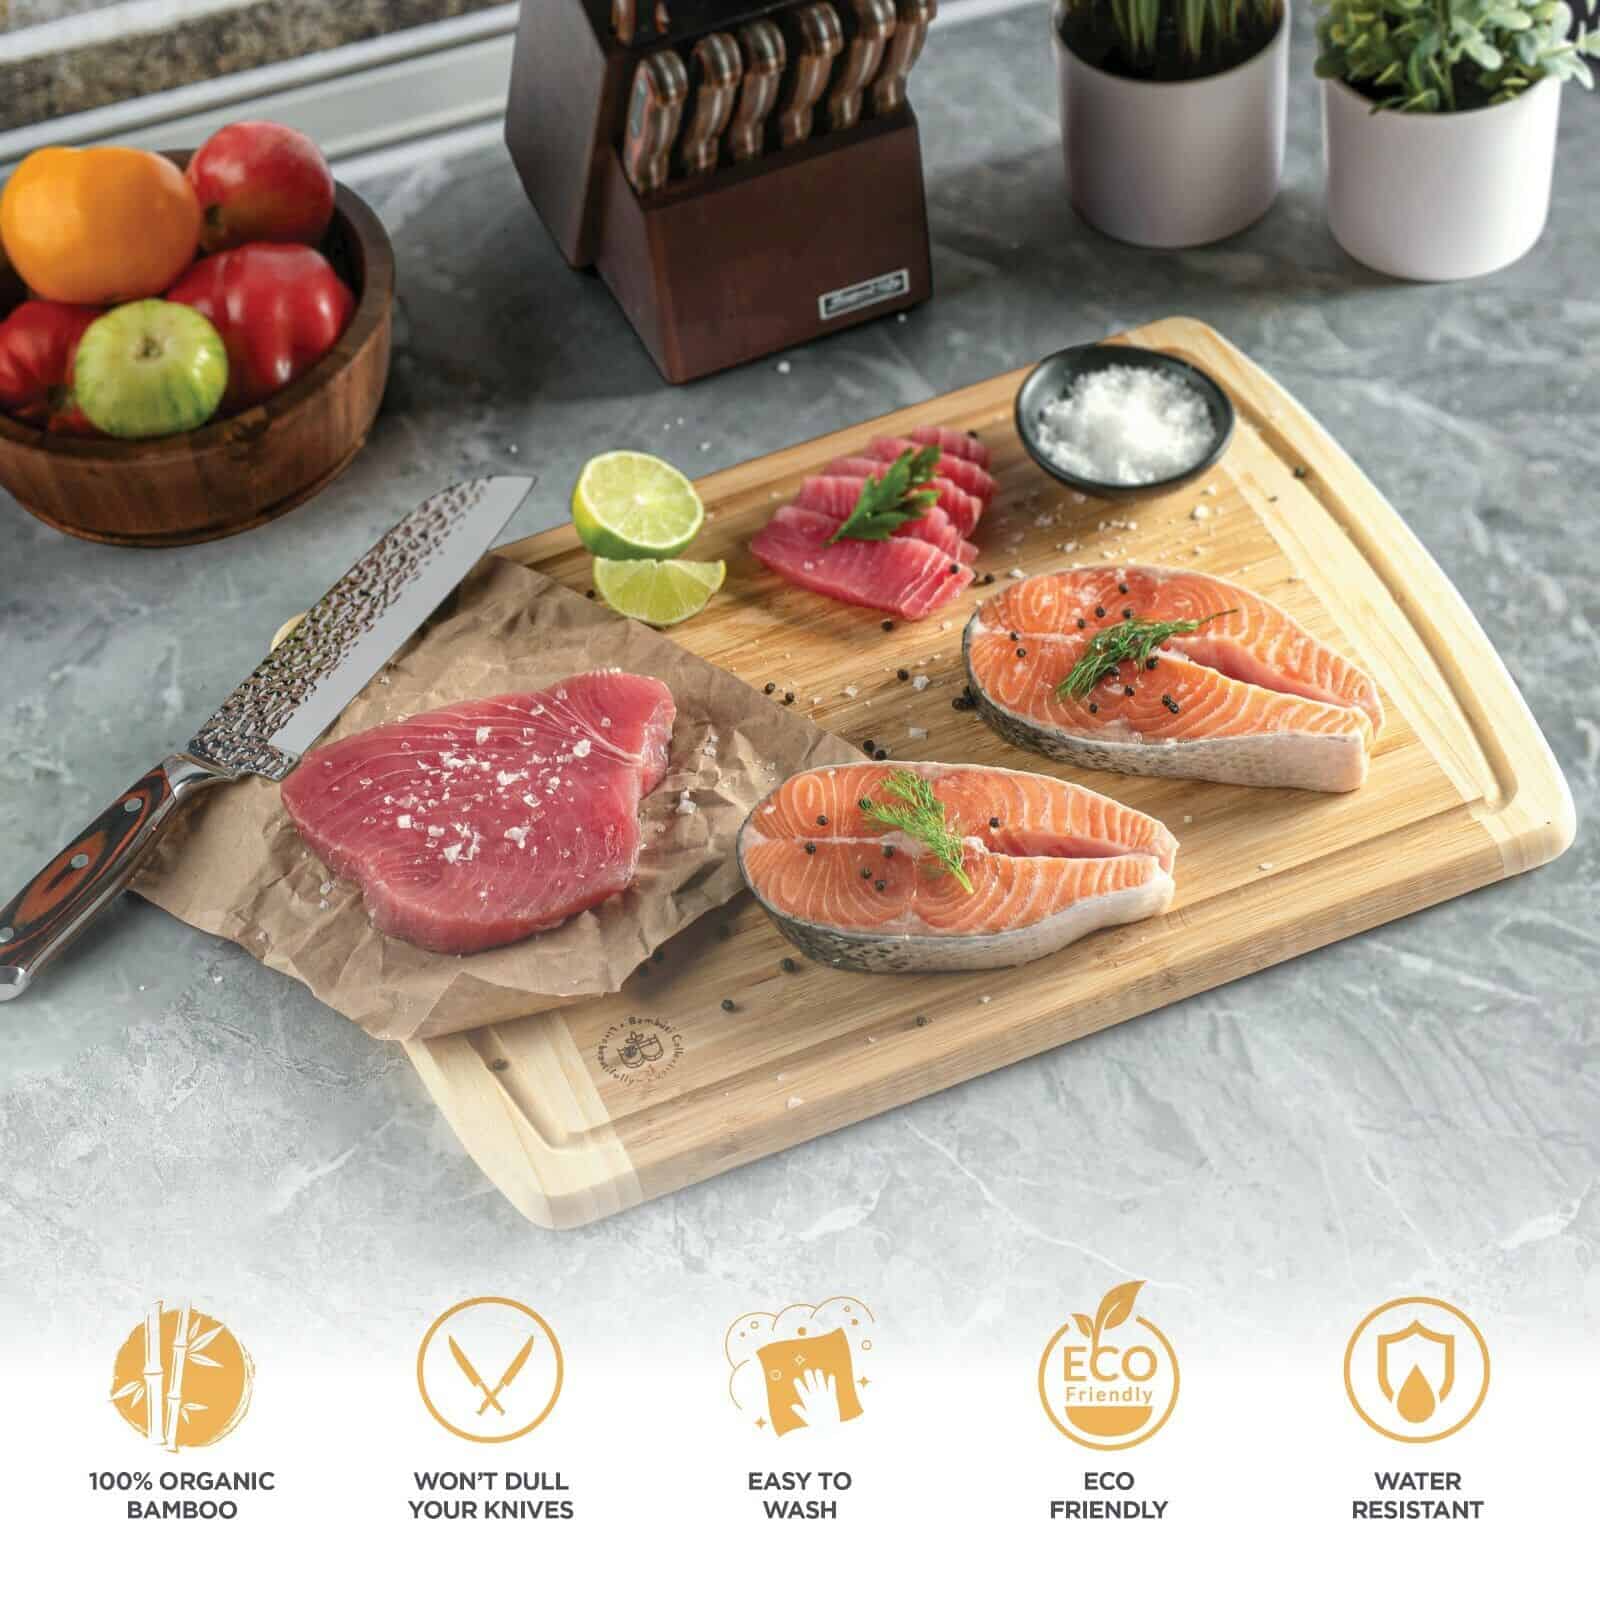 Sentence with product name included: Top view of a Premium Thick Bamboo Cutting Board Set of 2-Juice Grooves with raw salmon slices, a salmon steak, herbs, and lime on a kitchen countertop, with eco-friendly icons displayed below.